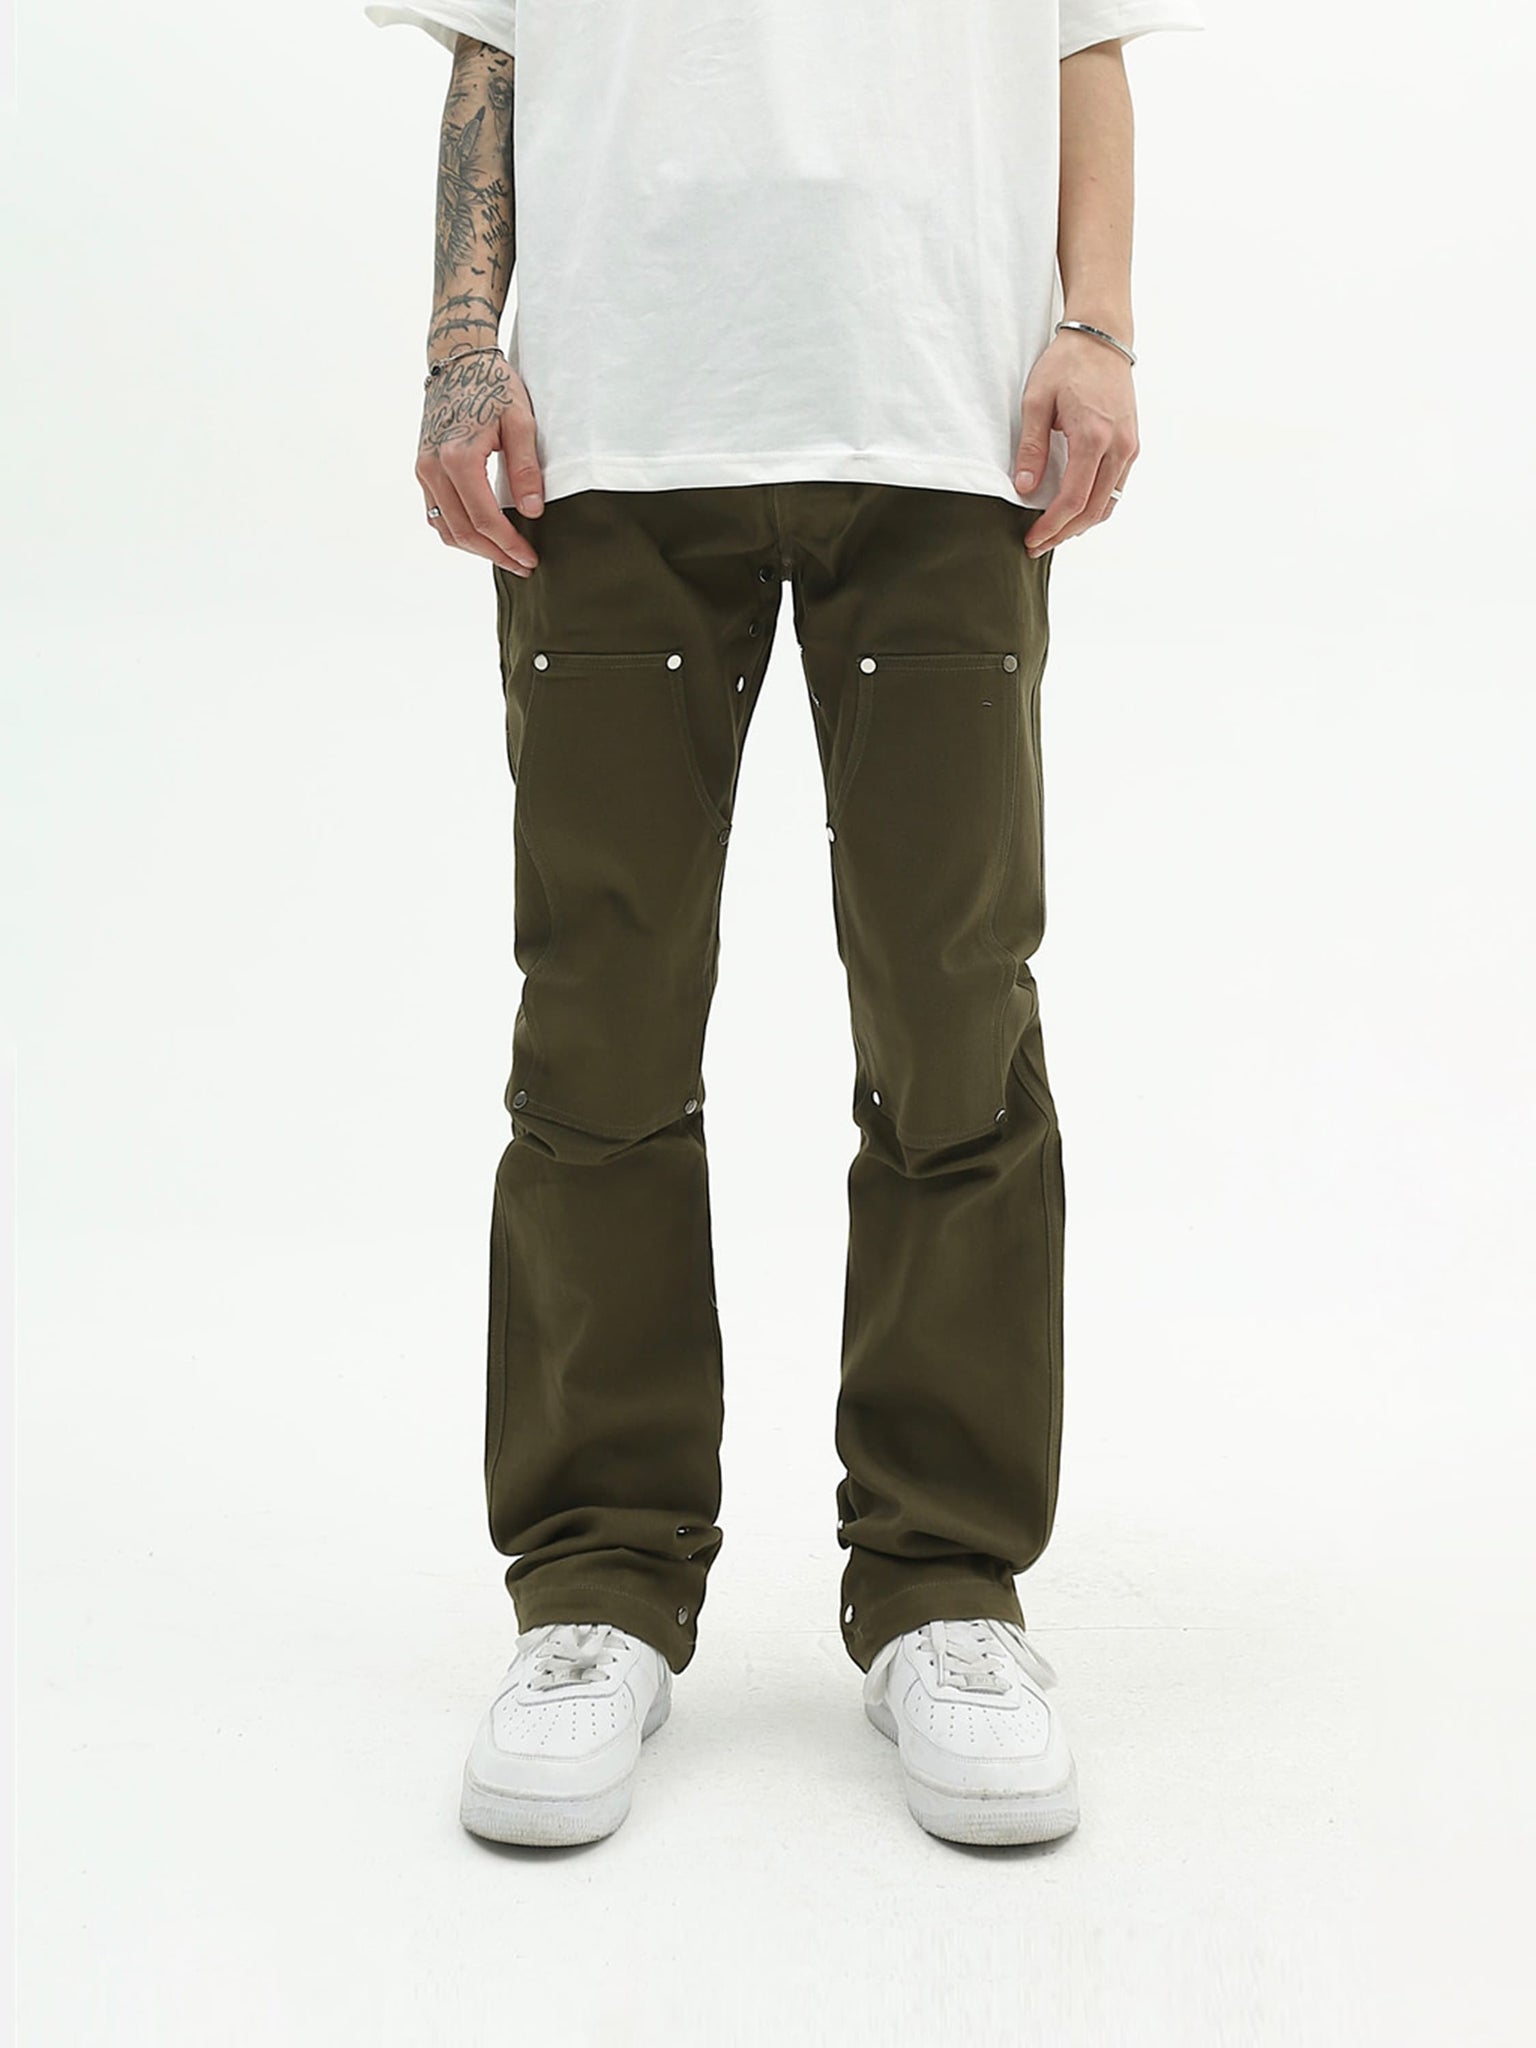 The Supermade American High Street Digital Embroidered Jeans